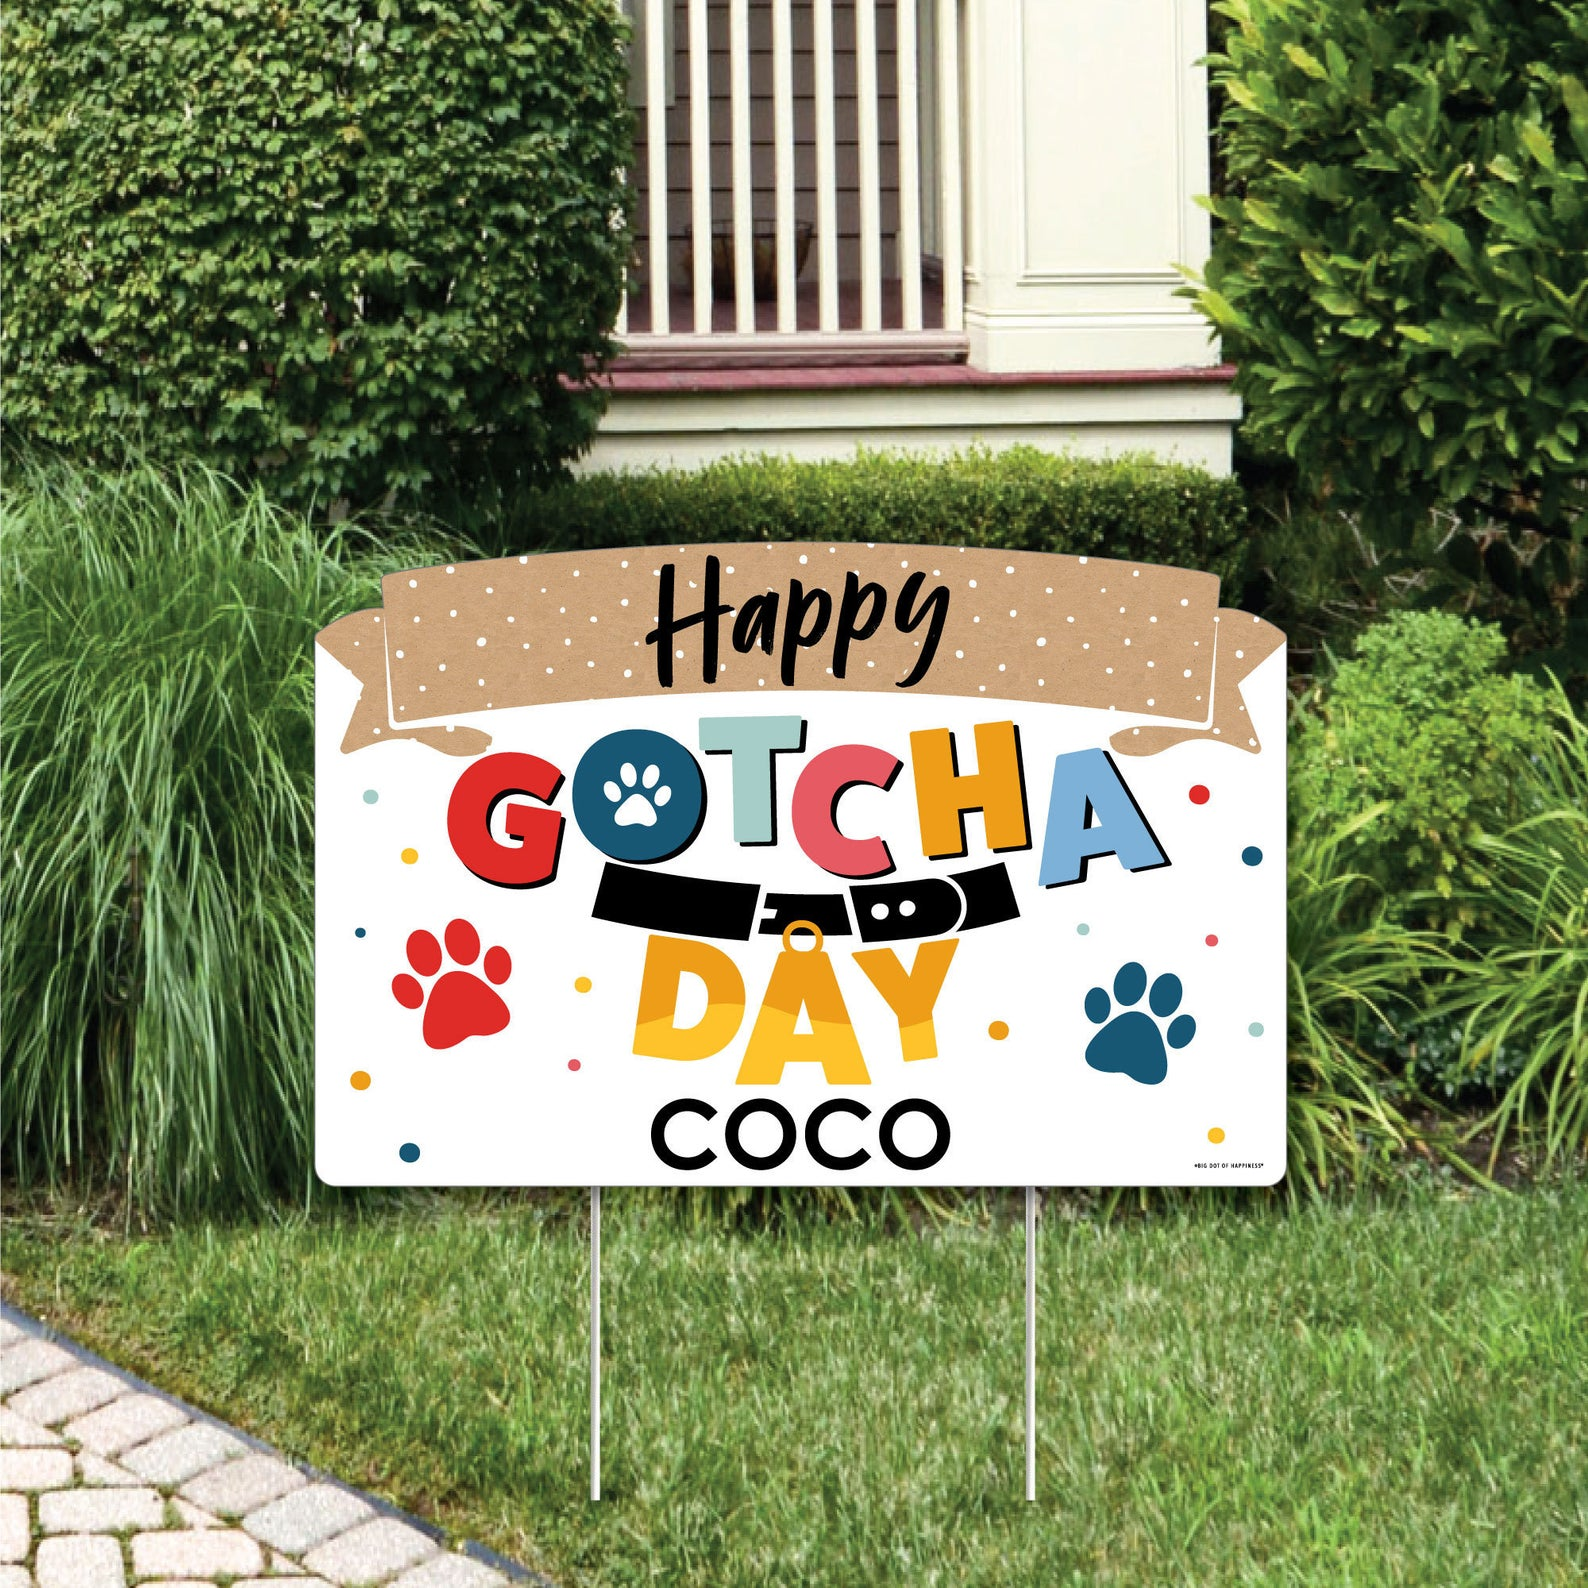 A colorful lawn sign that says "Happy Gotcha Day Coco"